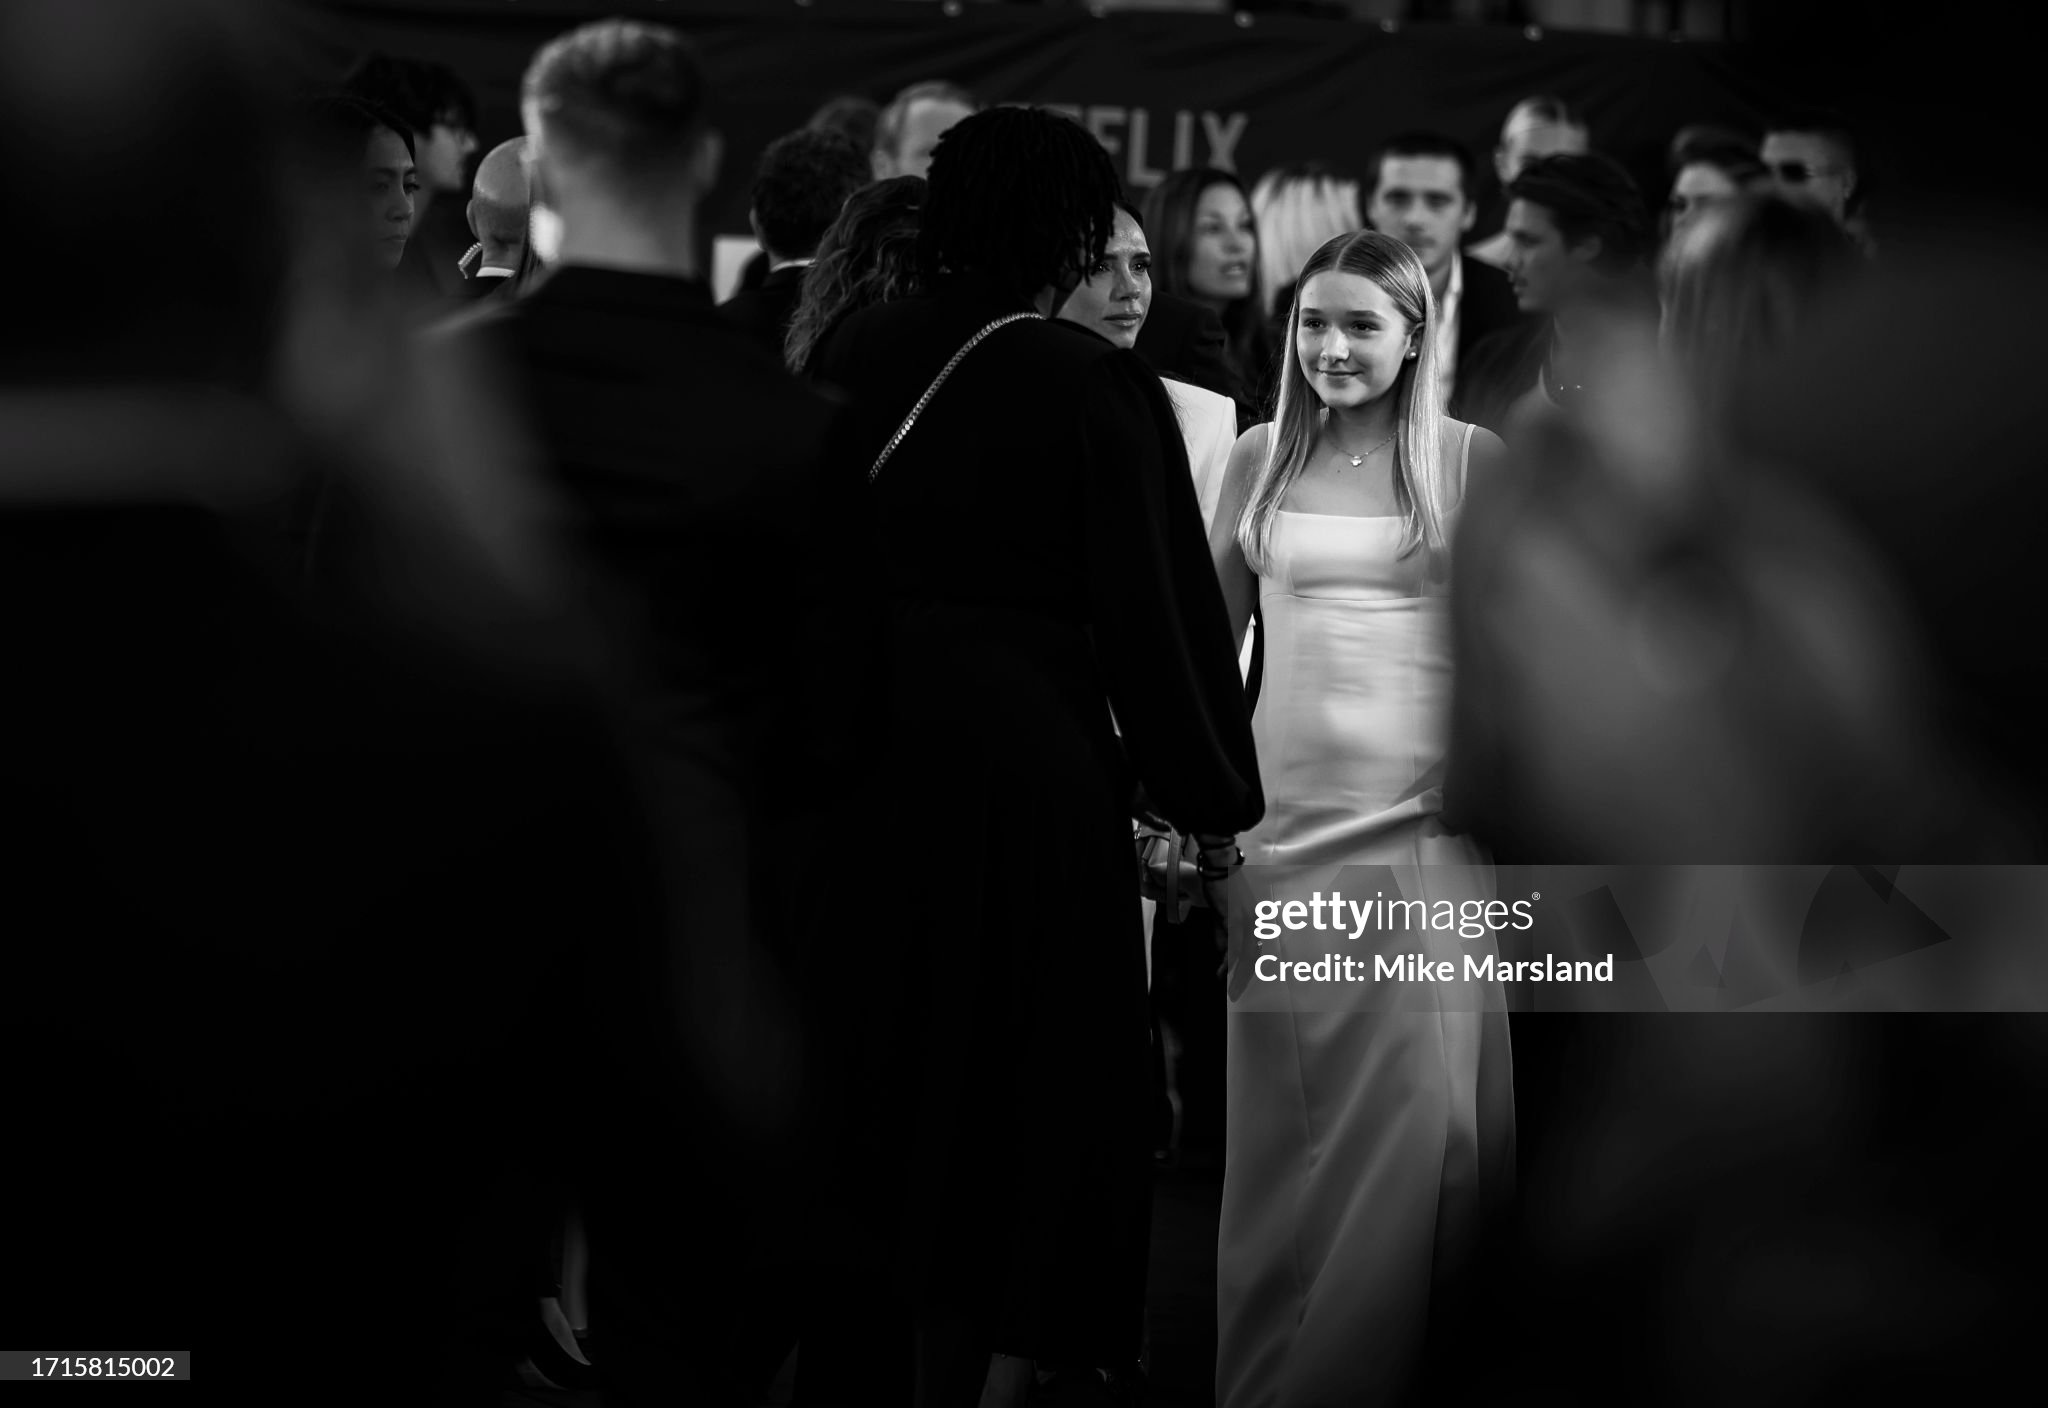 gettyimages-1715815002-2048x2048.jpg